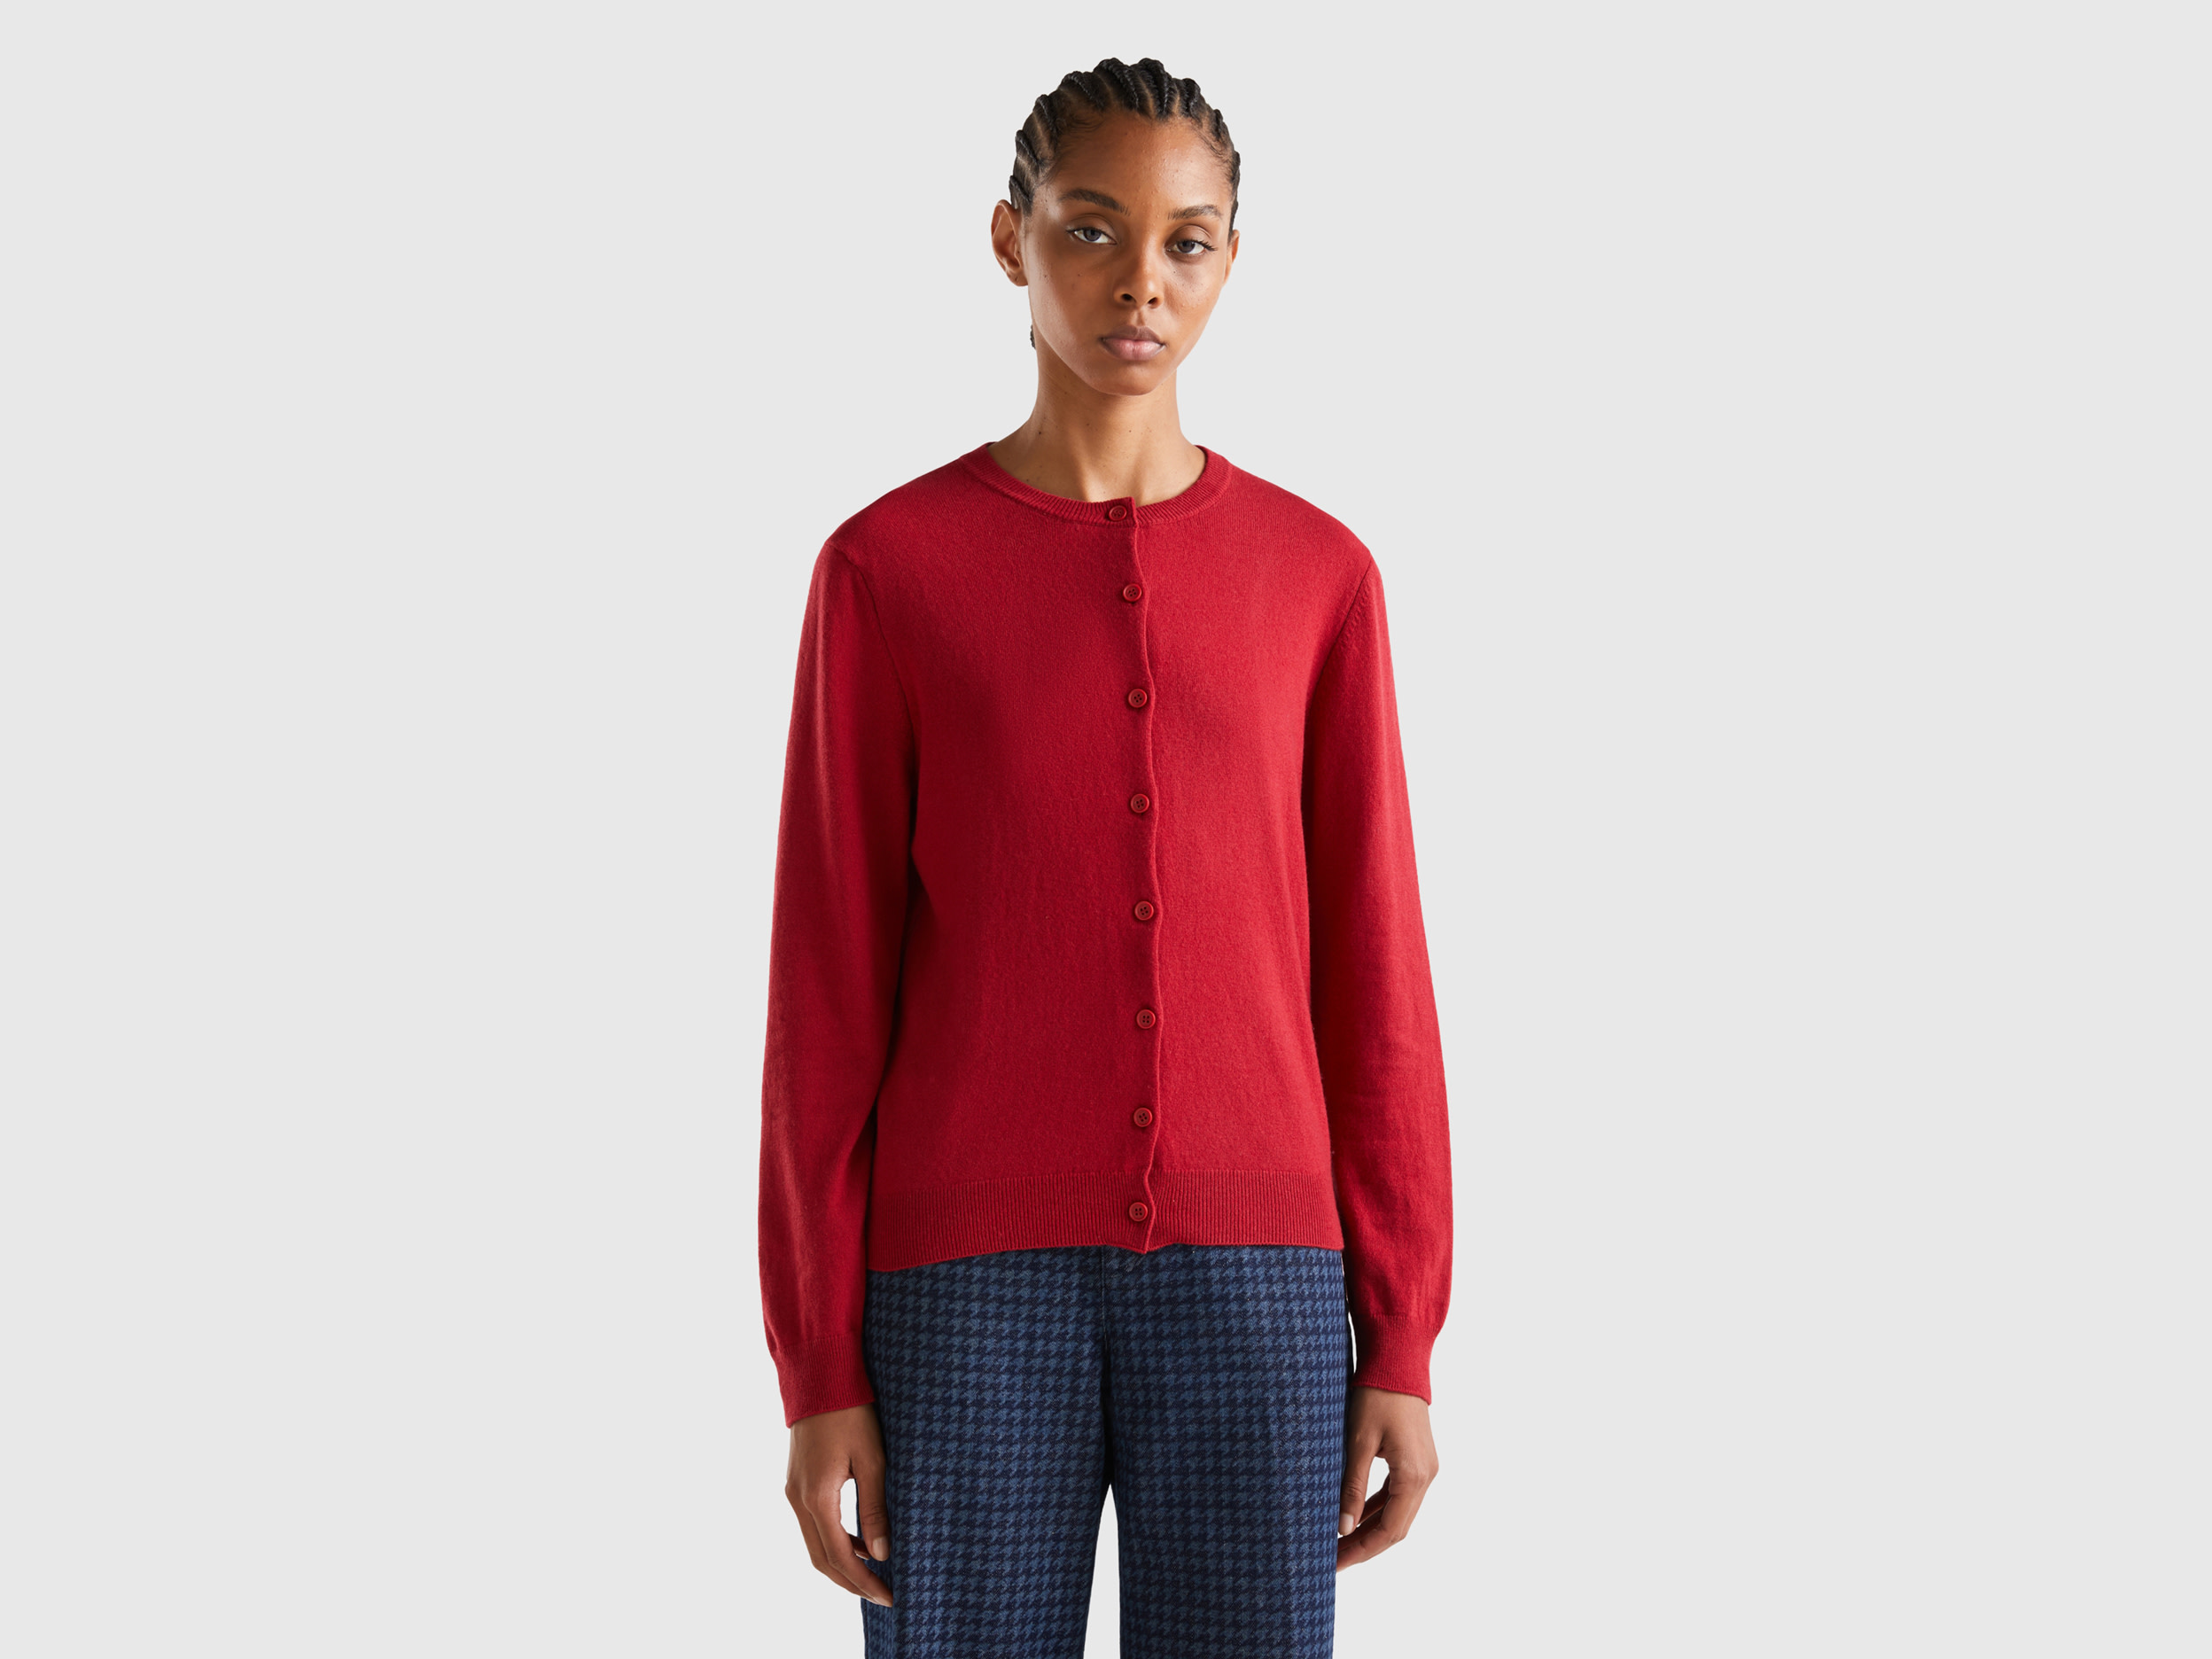 Benetton, Brick Red Cardigan In Cashmere And Wool Blend, size S, Brick Red, Women